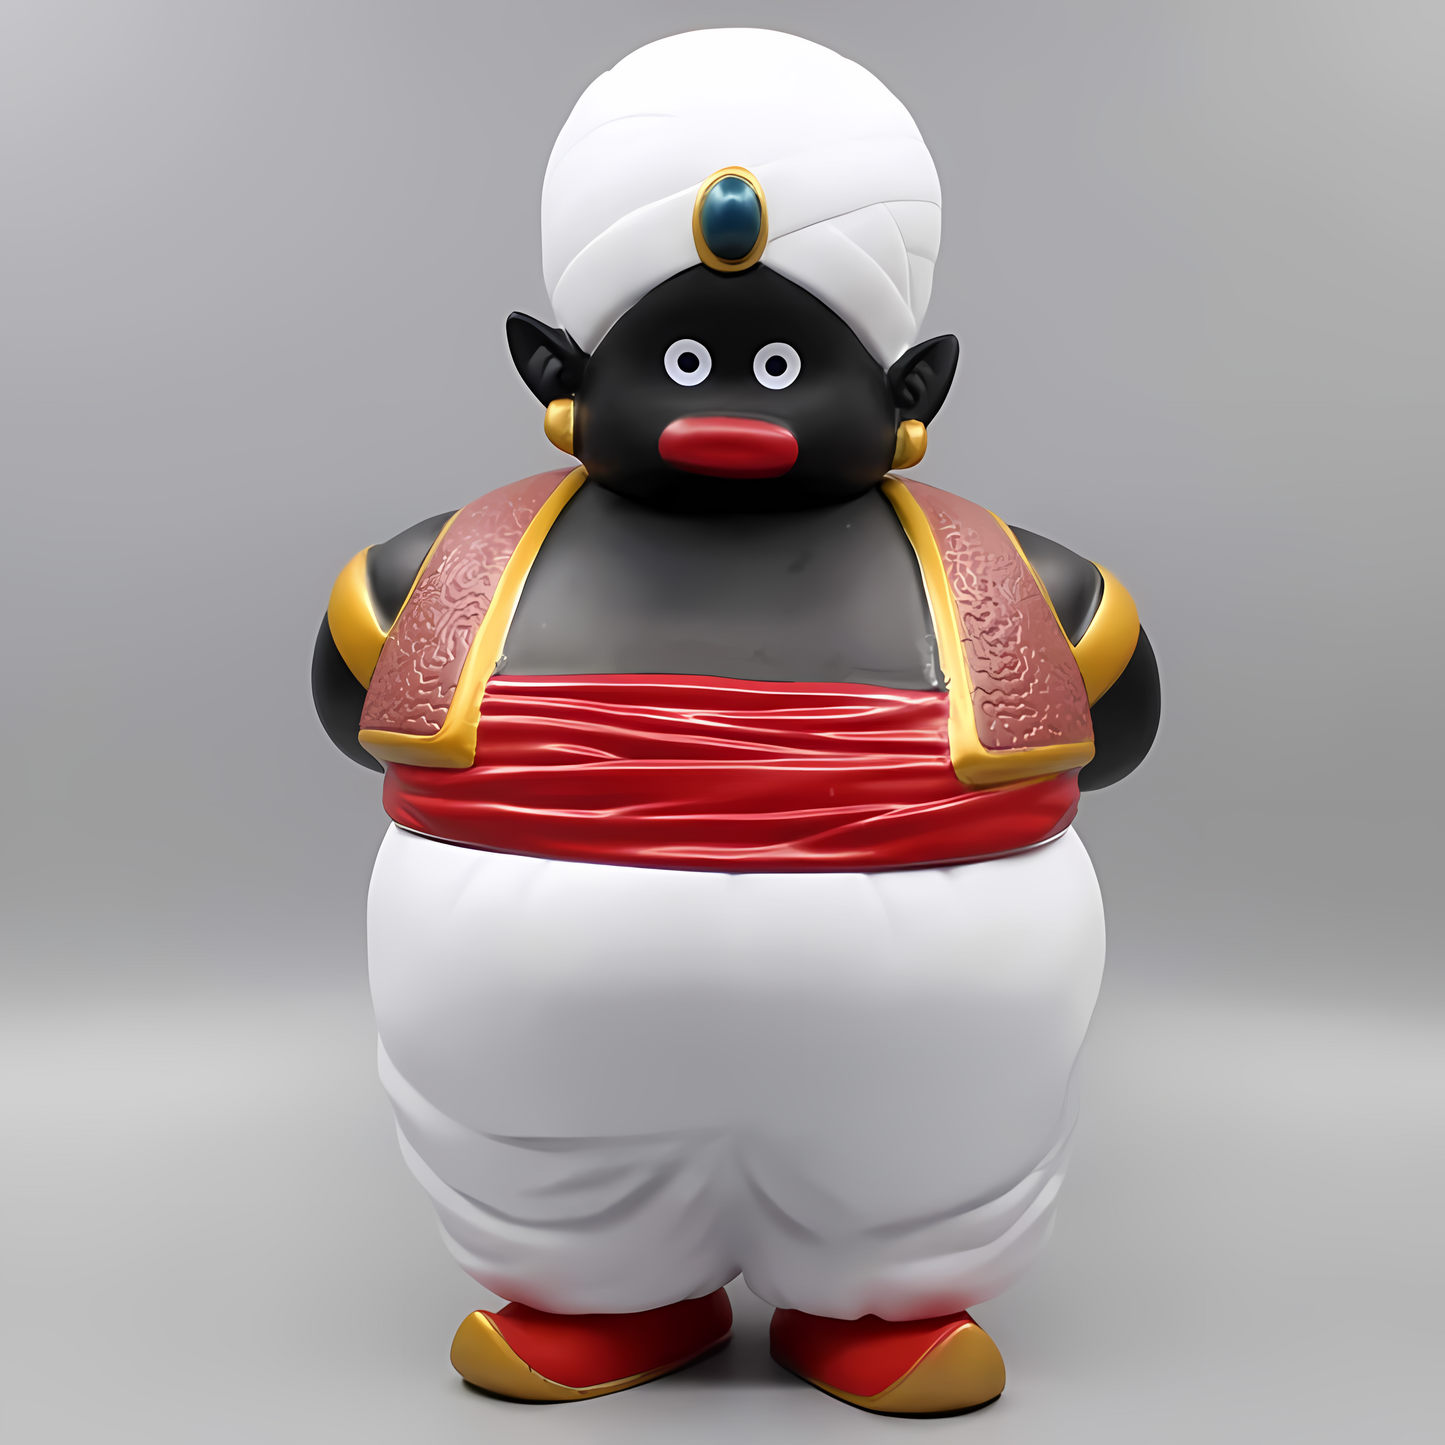 Figure of 'Mystical Guardian Popo' from Dragon Ball, portrayed as a stout figure with a white turban and a red vest, against a plain grey background.